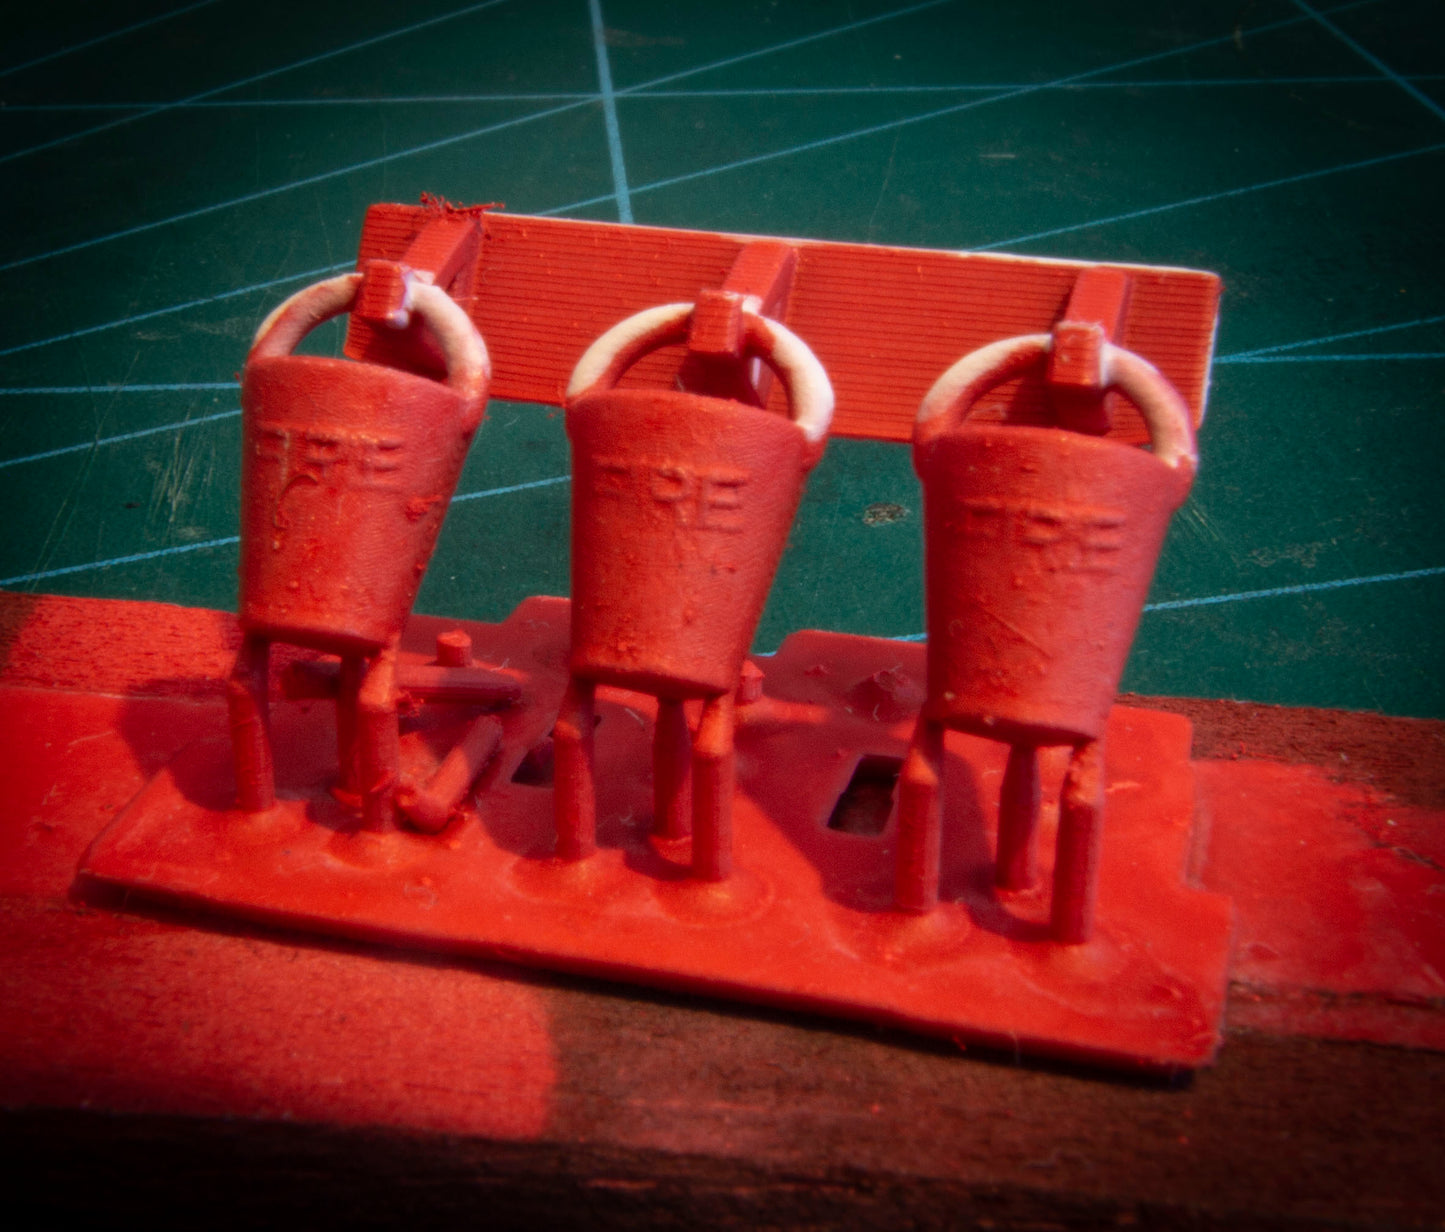 O, OO, TT & N Gauge Station Fire Buckets Suited to Steam ERA and Heritage station modelling